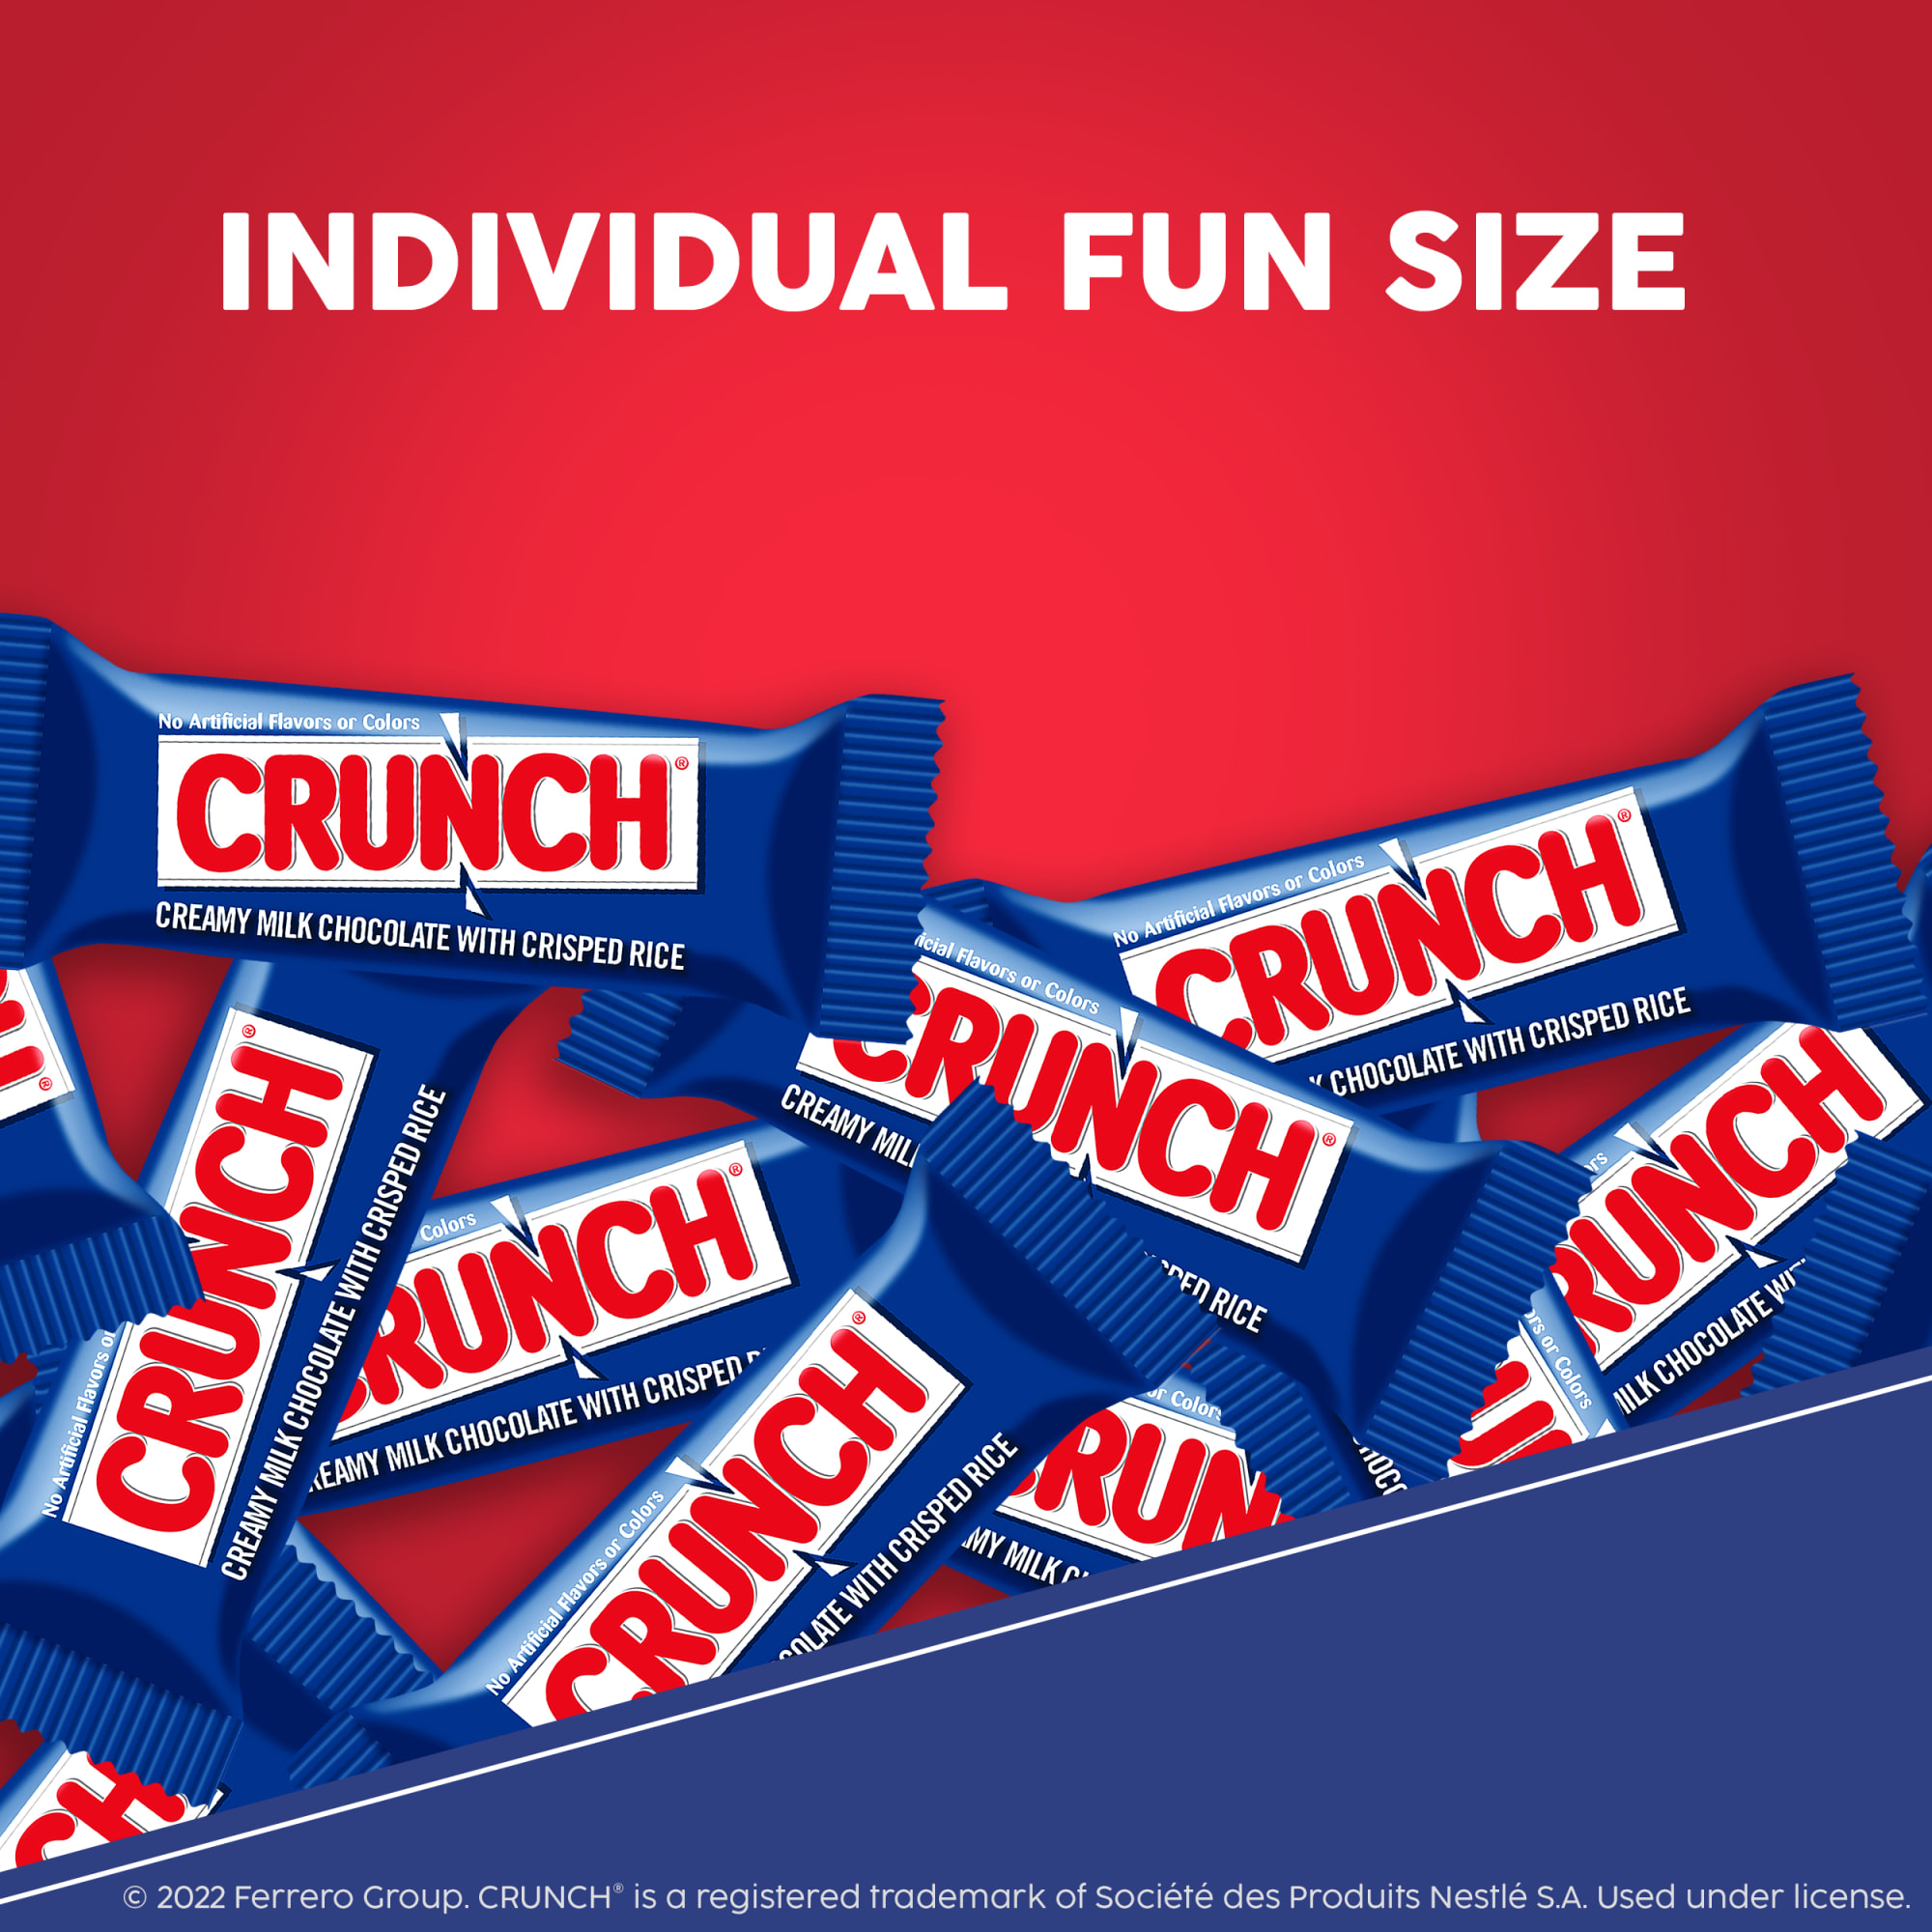 CRUNCH, Milk Chocolate and Crisped Rice, Fun Size Candy Bars, 10 oz - image 3 of 11